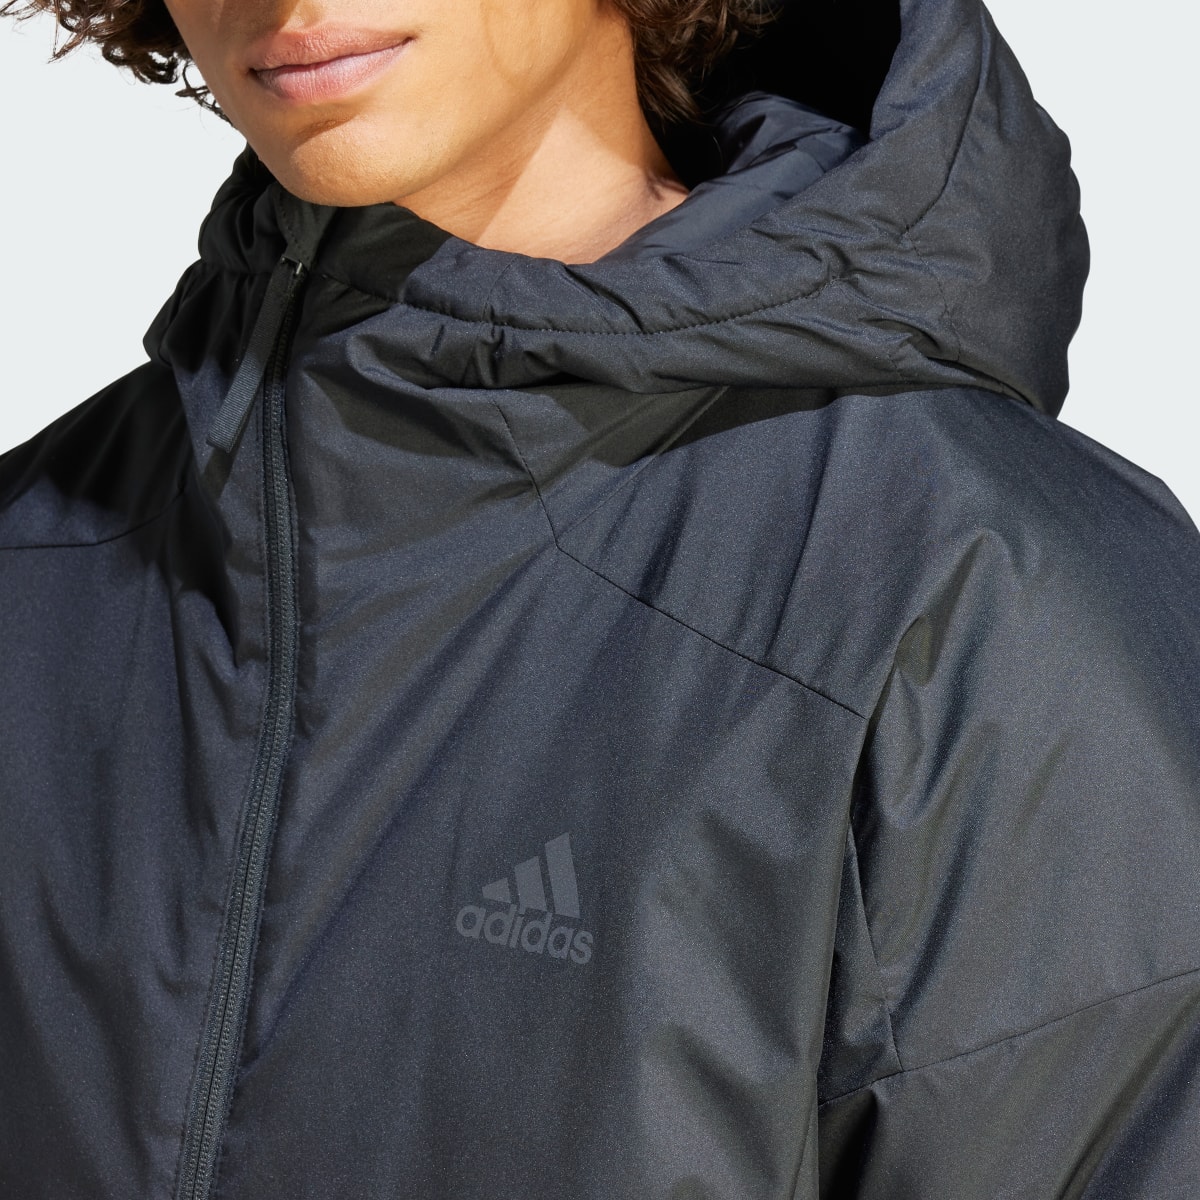 Adidas Traveer Insulated Mont. 6